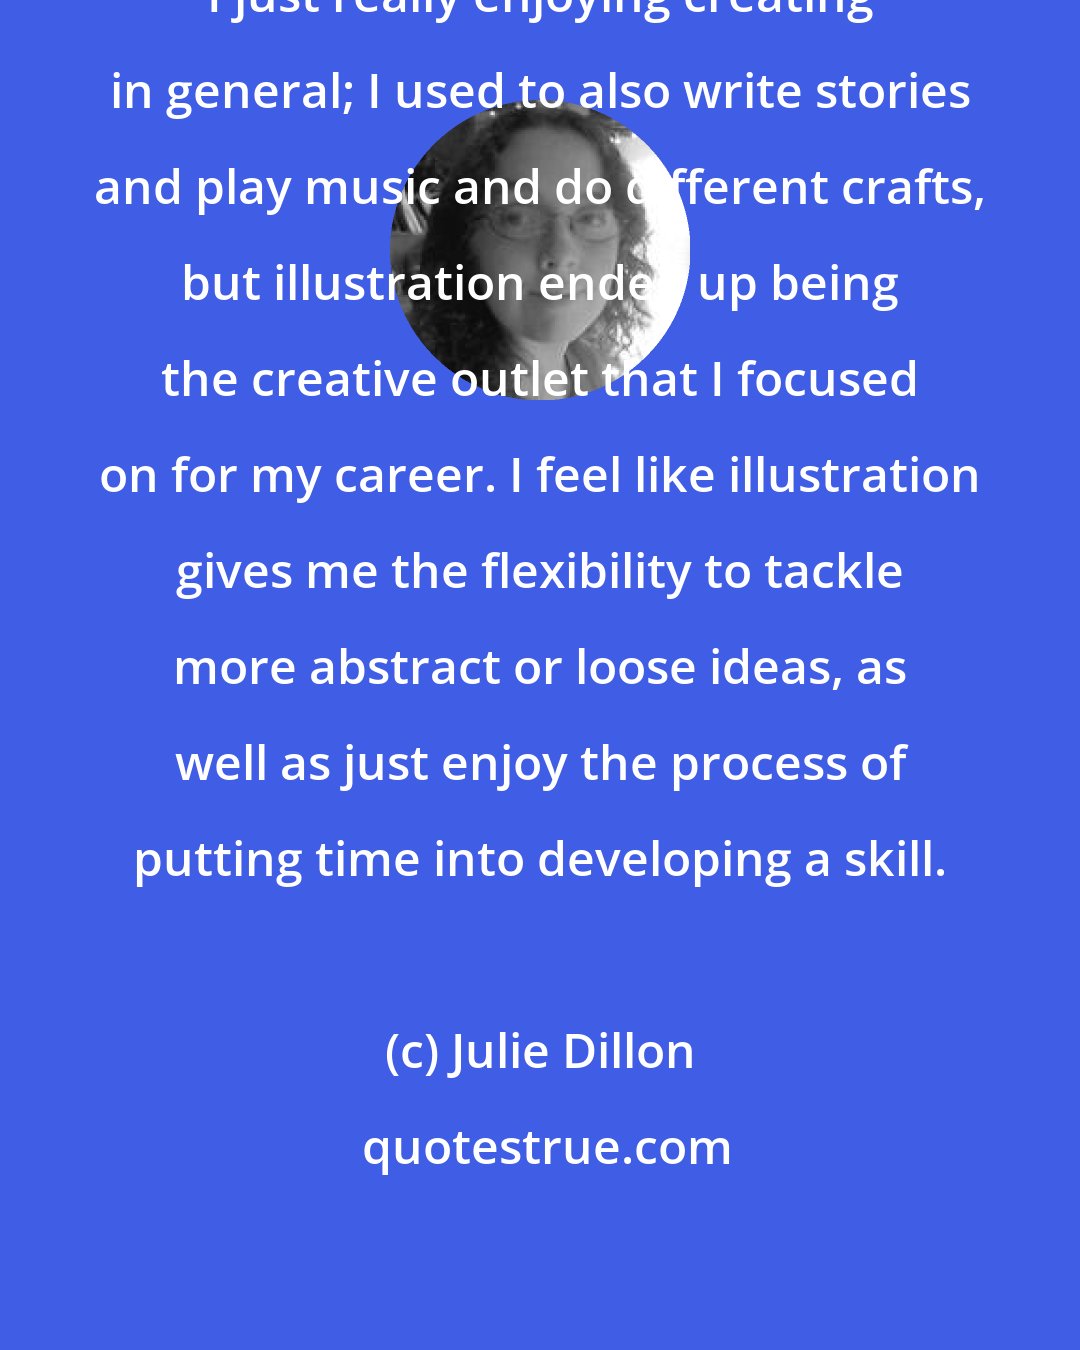 Julie Dillon: I just really enjoying creating in general; I used to also write stories and play music and do different crafts, but illustration ended up being the creative outlet that I focused on for my career. I feel like illustration gives me the flexibility to tackle more abstract or loose ideas, as well as just enjoy the process of putting time into developing a skill.